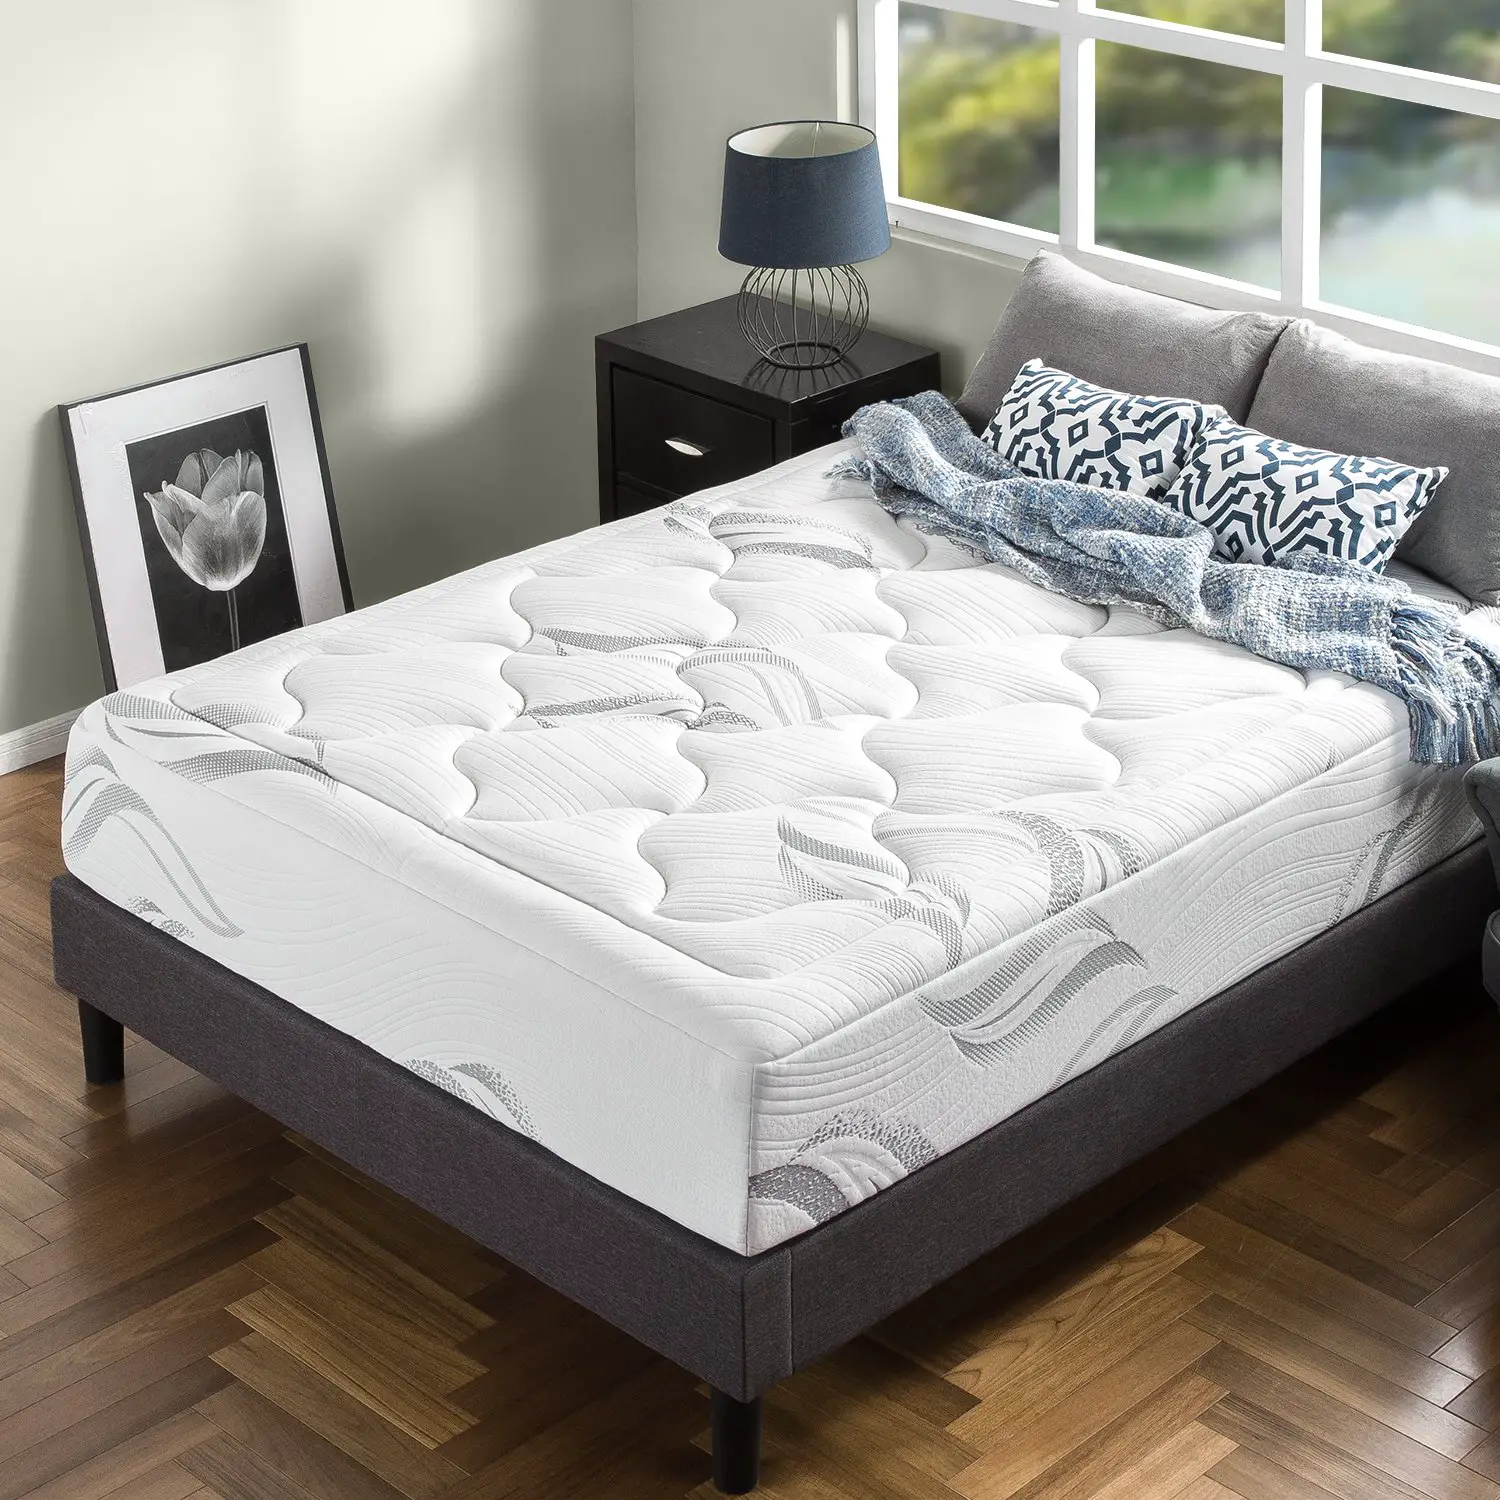 15 Of The Best Mattresses You Can Get On Amazon